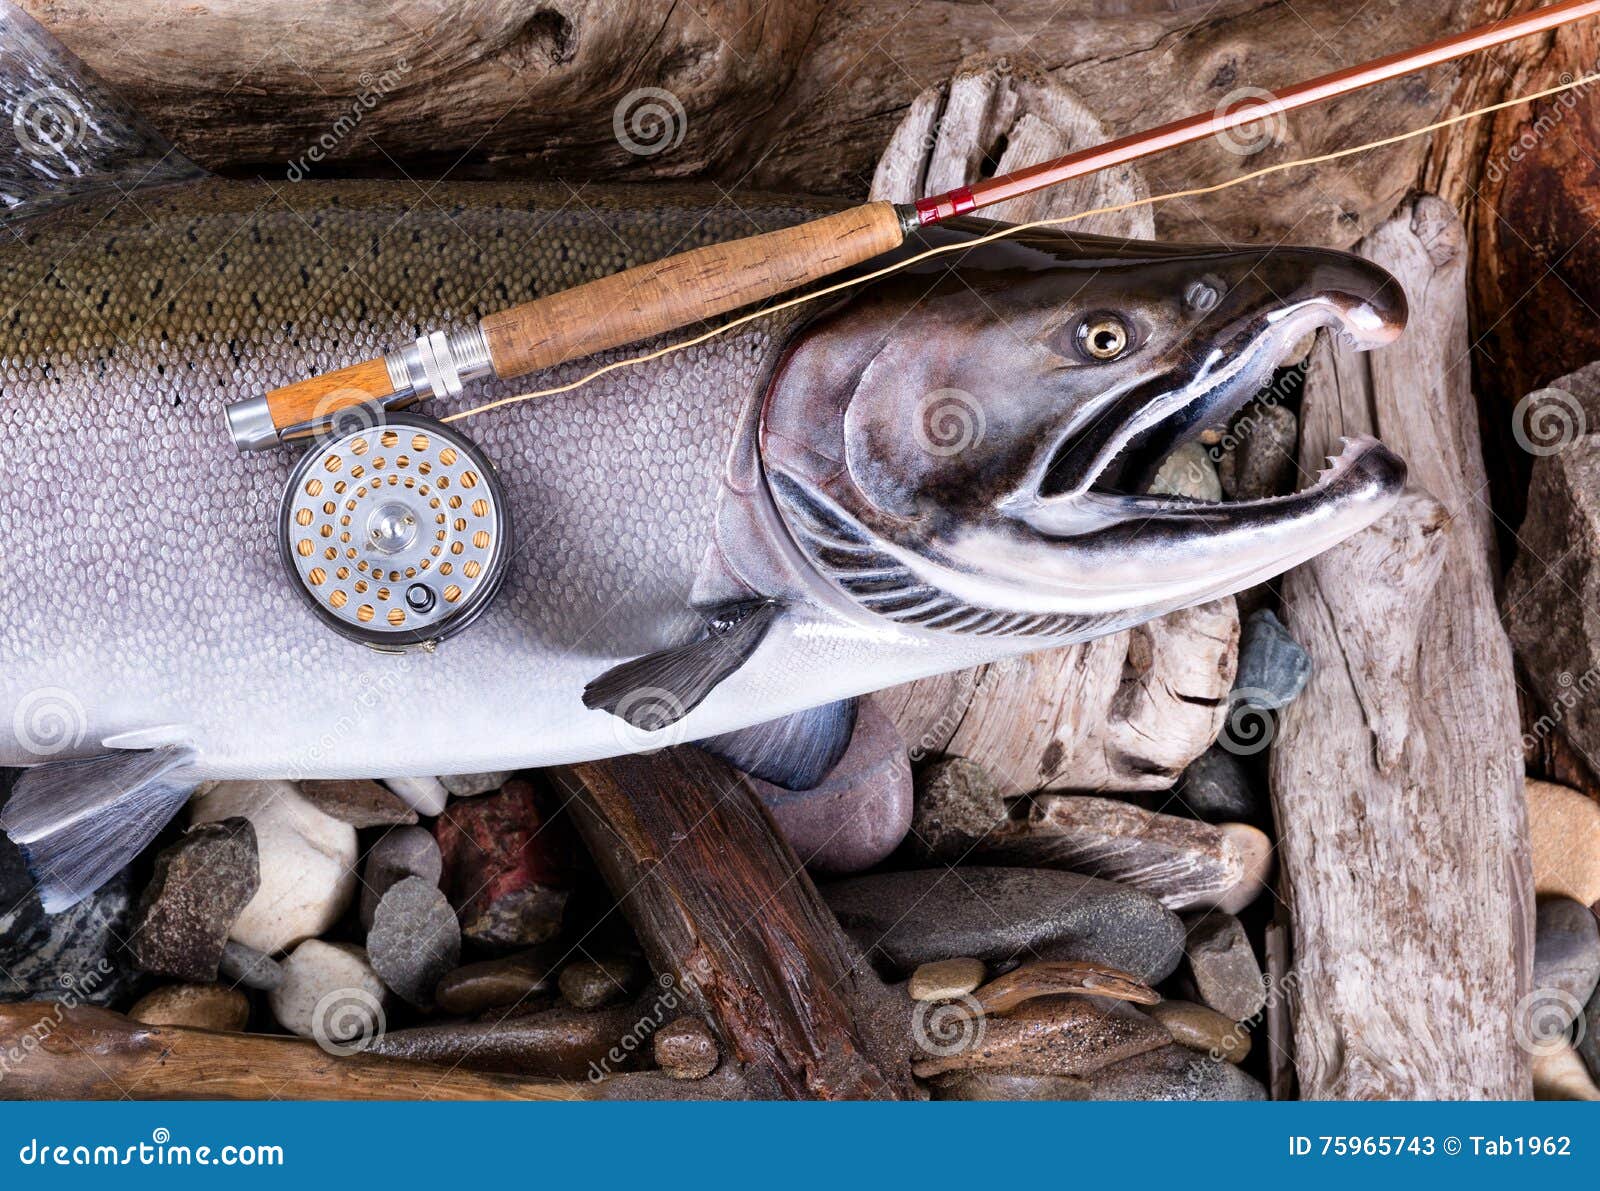 Vintage Fly Fishing Equipment on Large Trout in Riverbed Setting